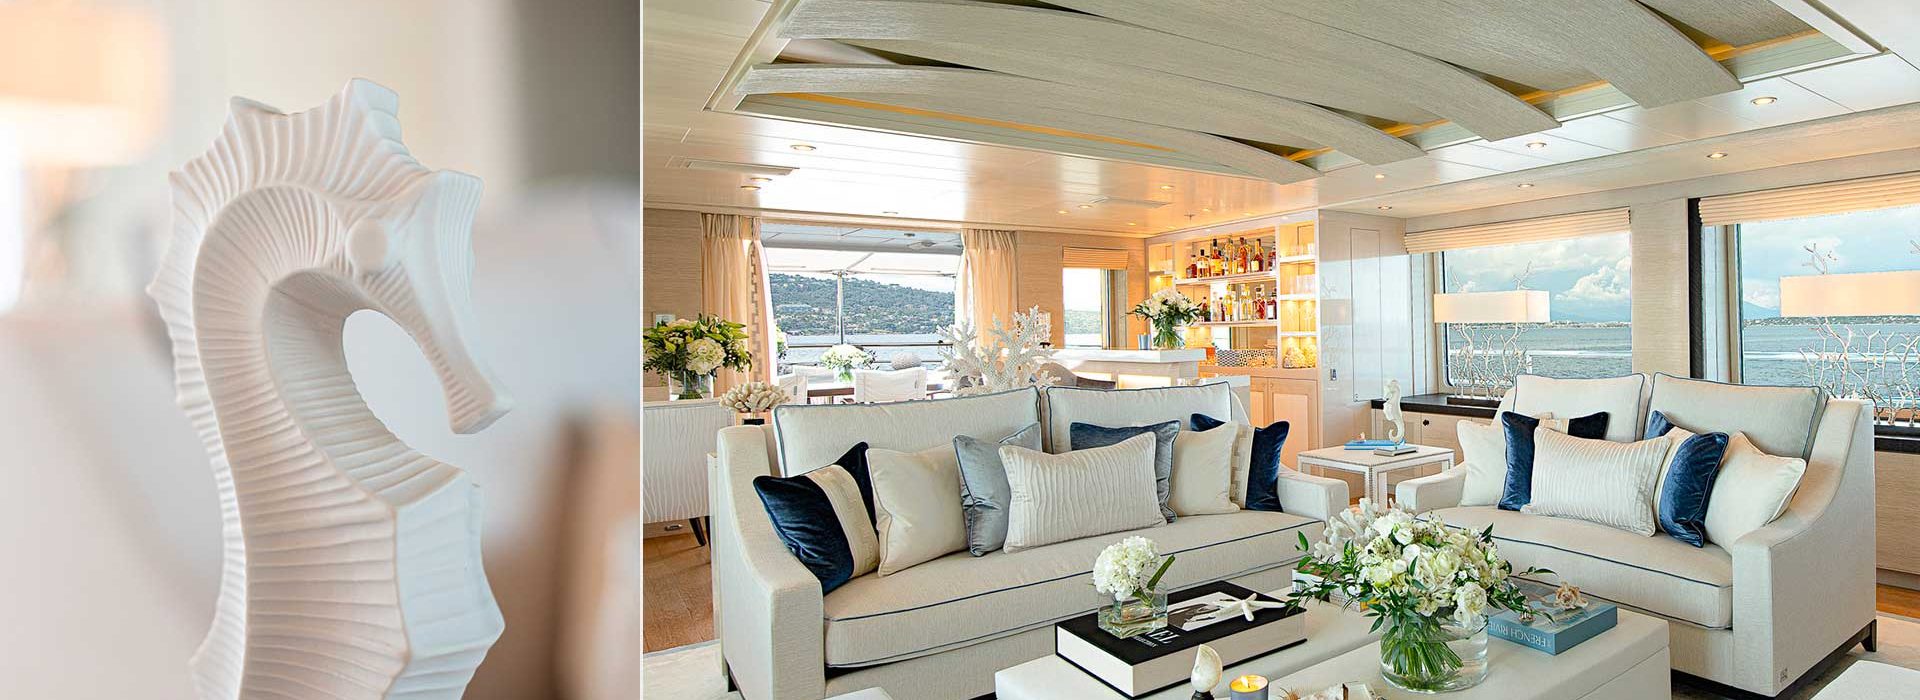 YACHT-REFIT-AMELS-LIMITED-EDITION-09-Dome-interior-design-Geneve-Suisse